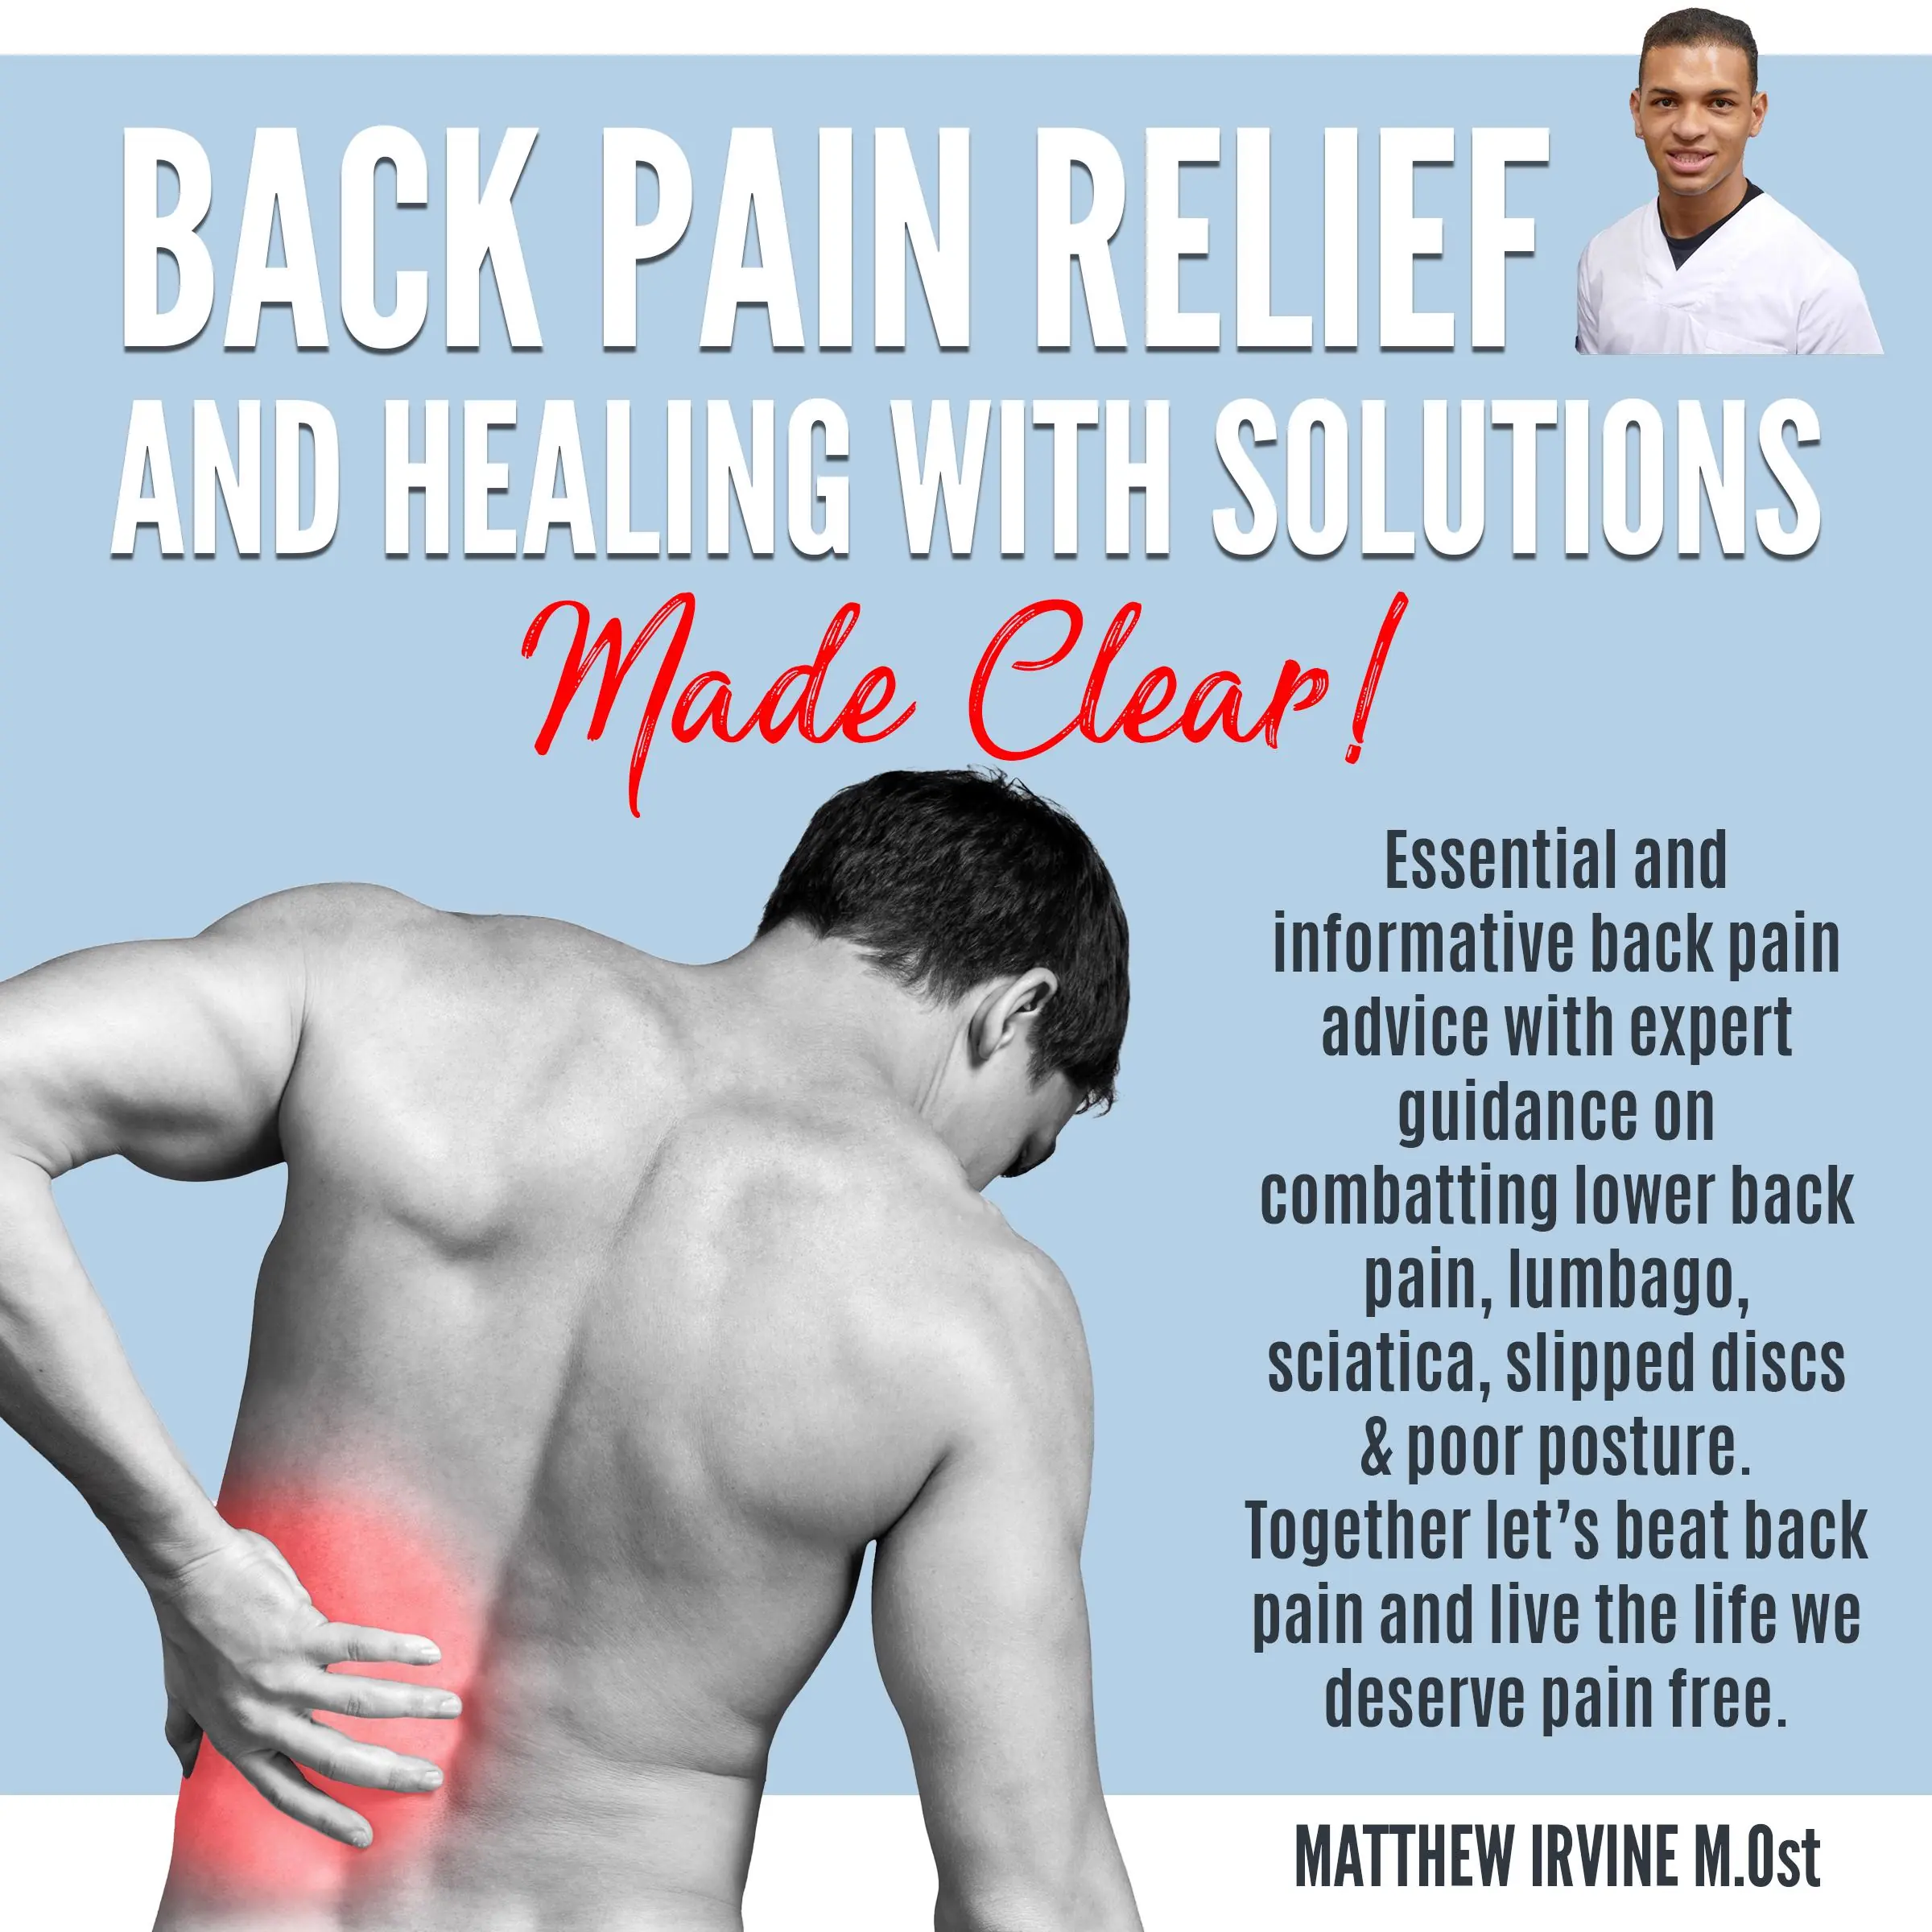 Back Pain Relief And Healing With Solutions Made Clear! Audiobook by Matthew Irvine